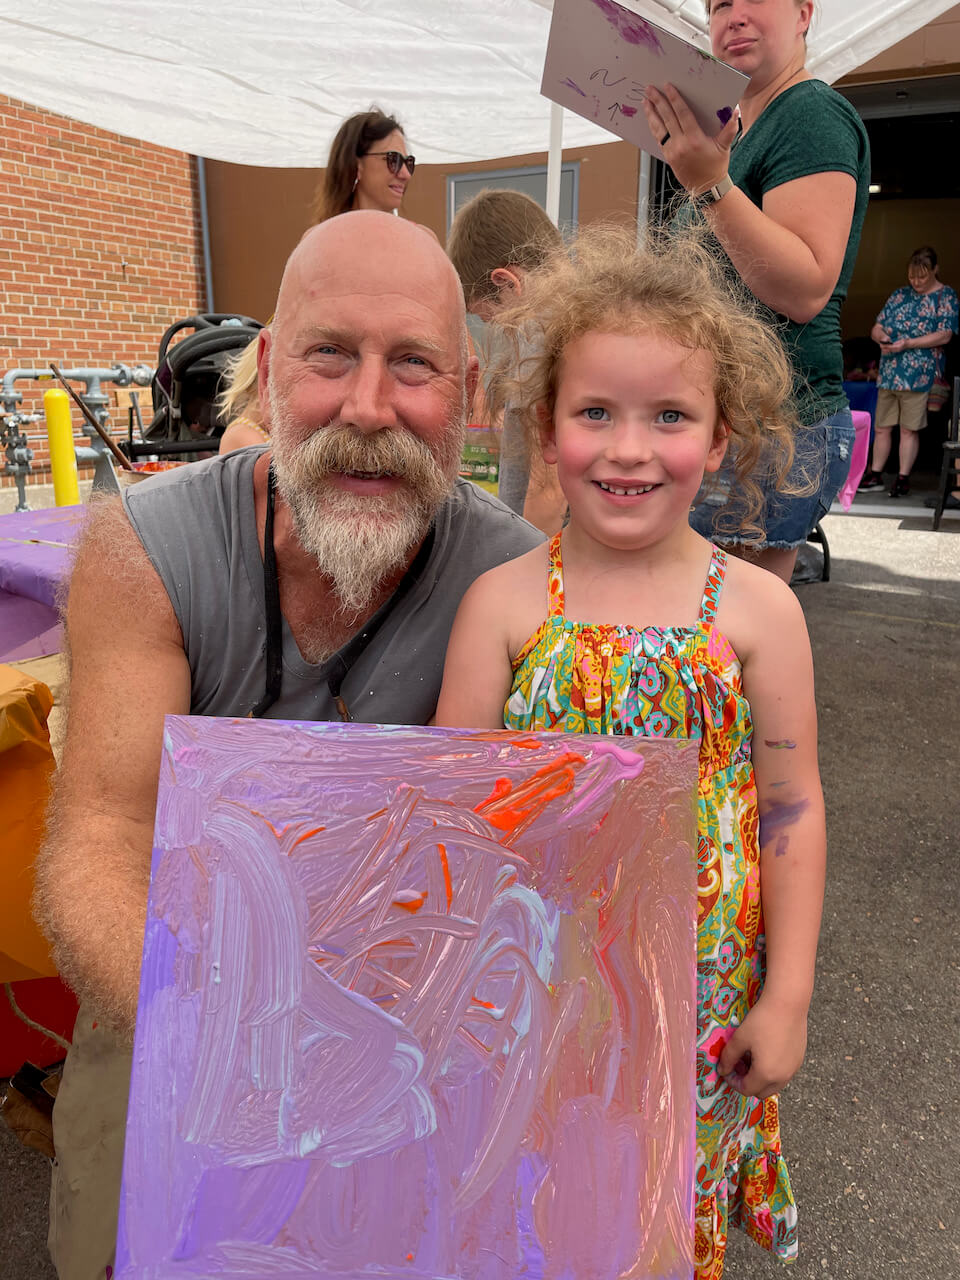 Artist Steven Bennet and Poppy Shier Painting Mosaic Tiles at the First Annual Arts and Peony Festival in Beaver Dam Wisconsin for the Nancy Zieman Mosaic Mural